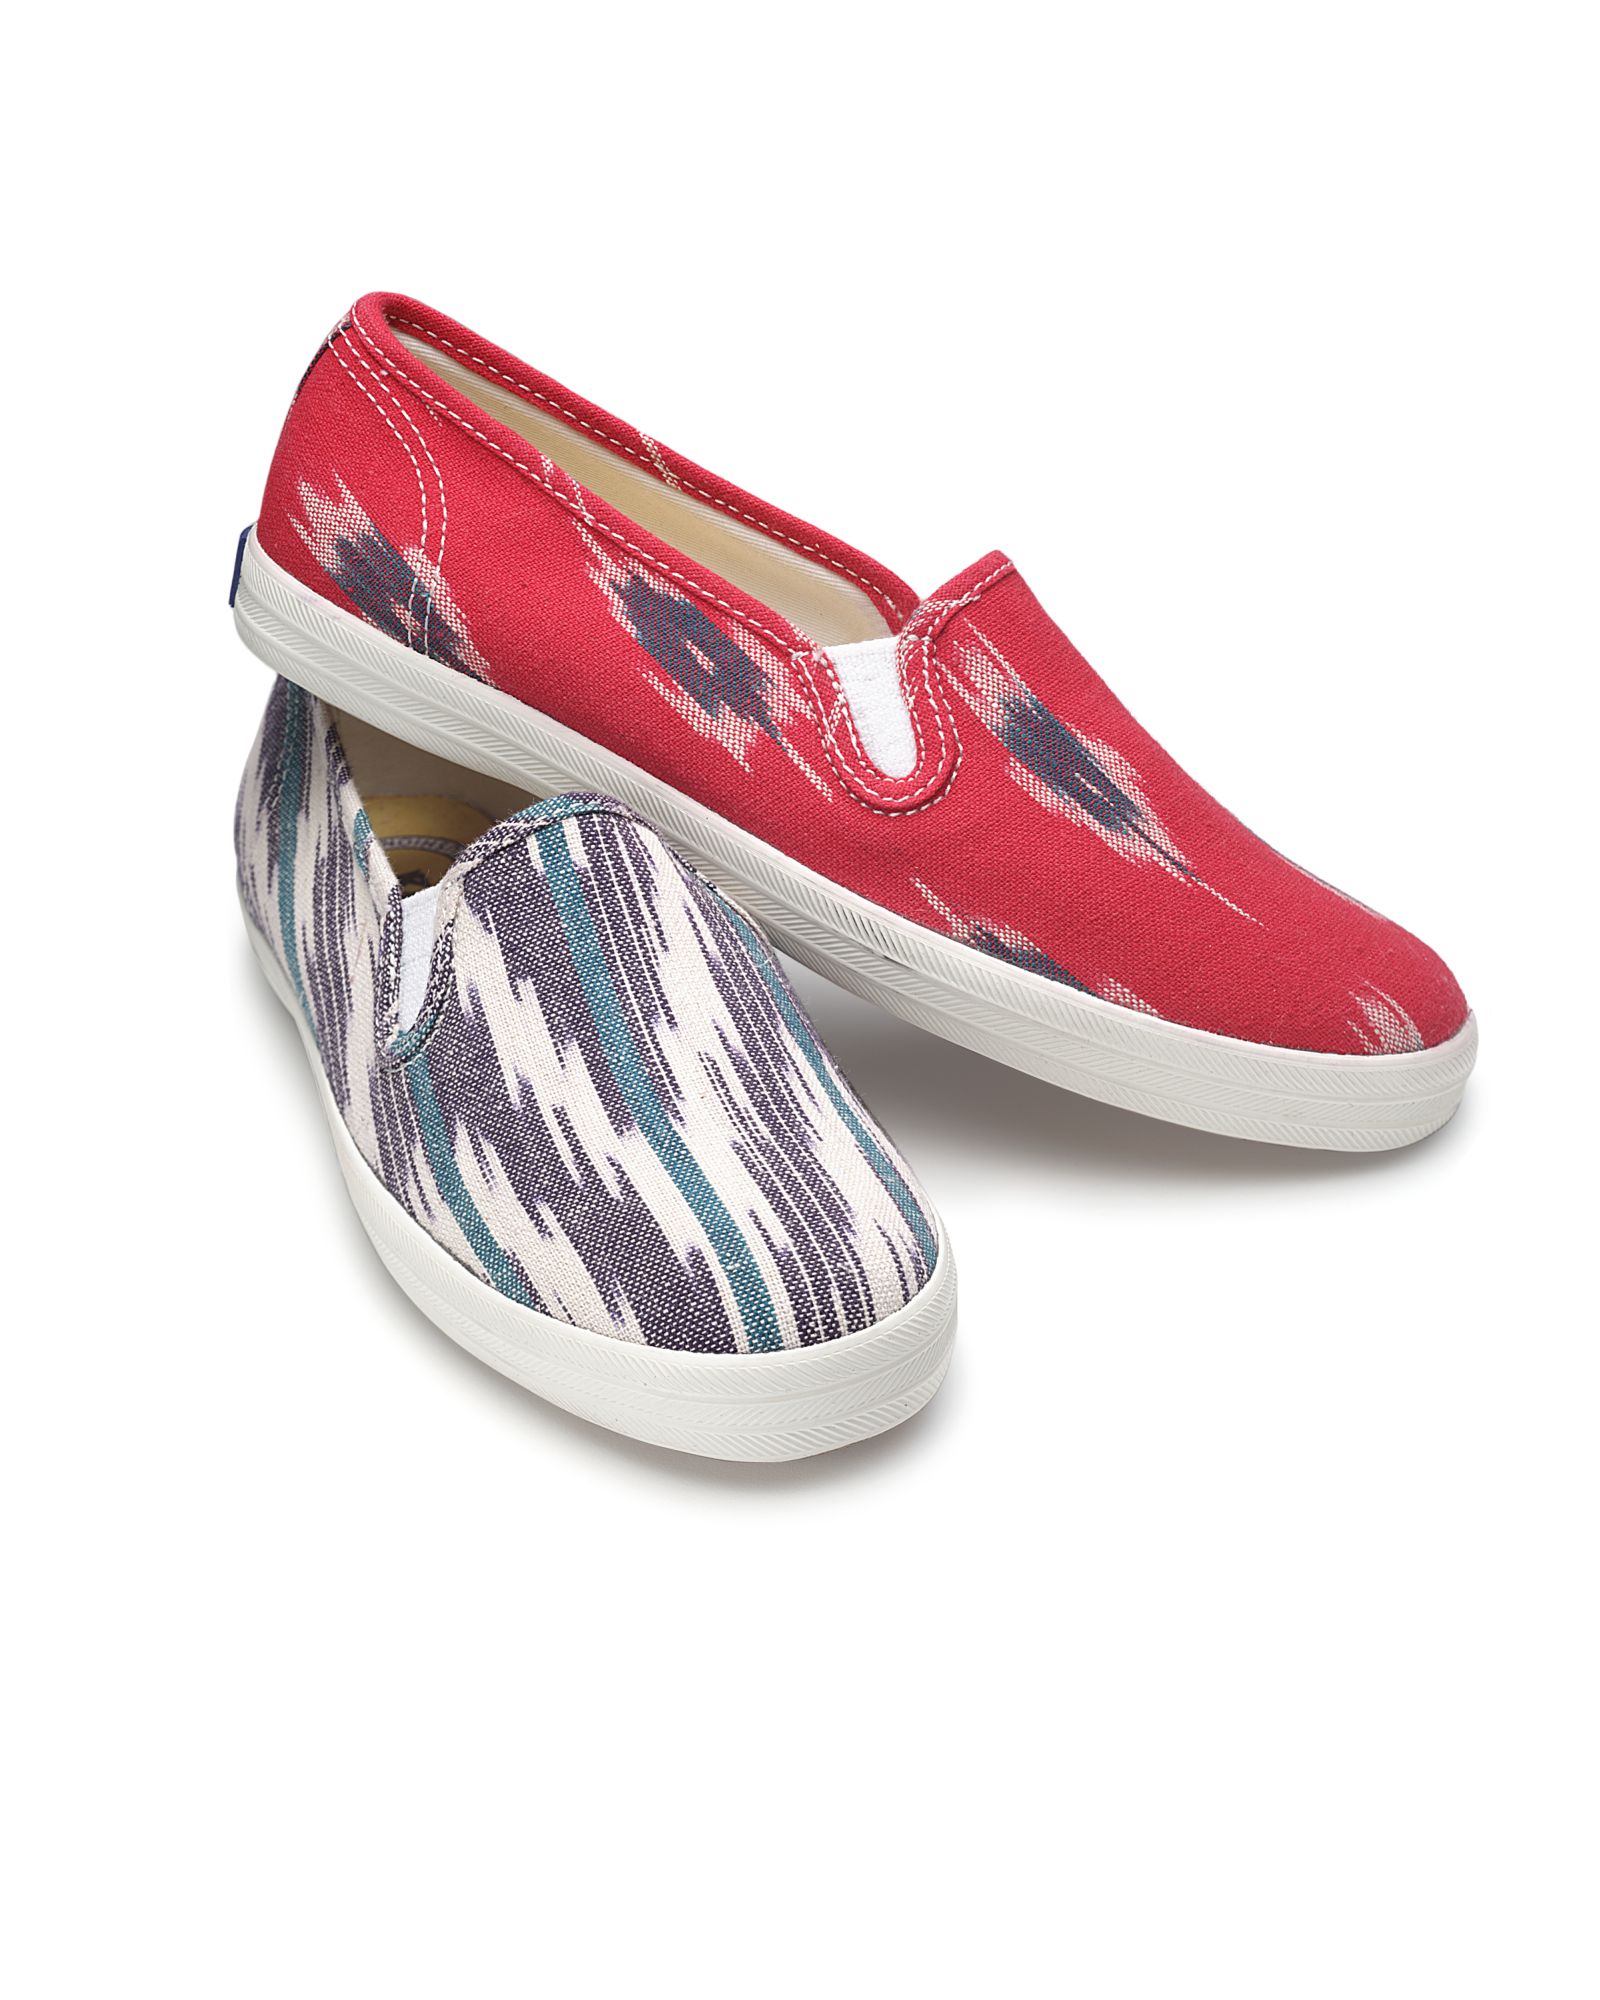 Keds by Steven Alan Launches in May